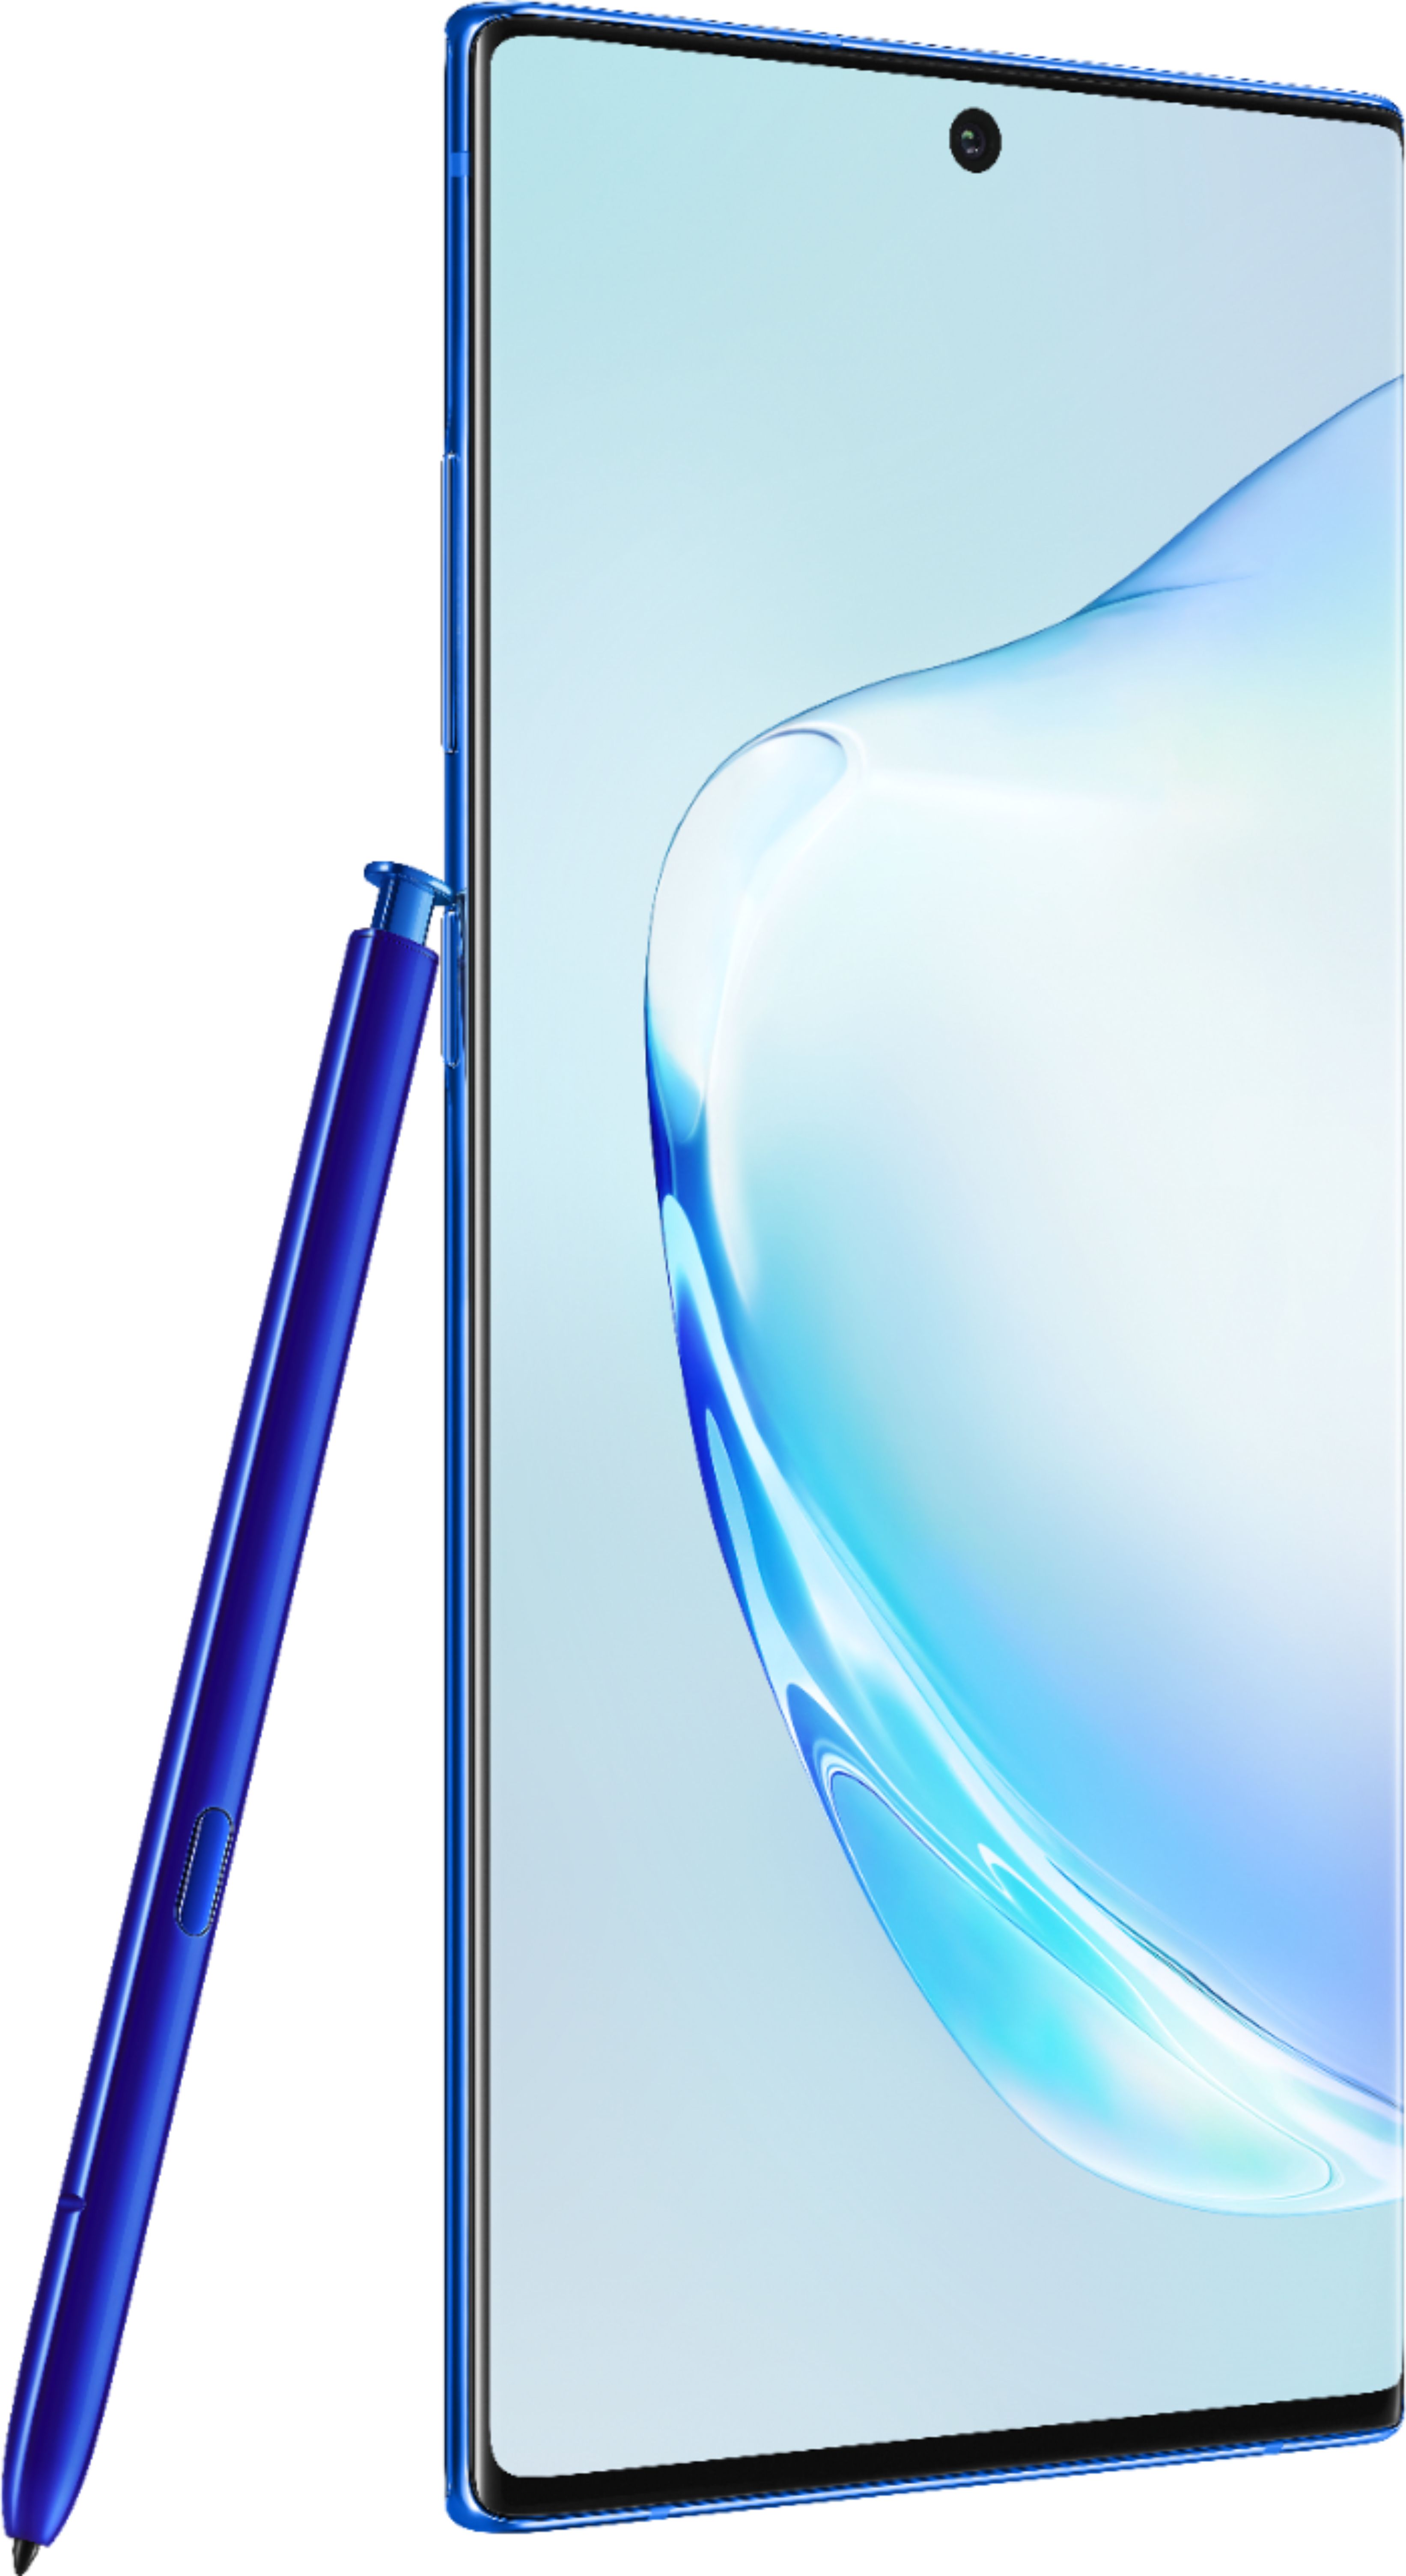 Angle View: Samsung - Geek Squad Certified Refurbished Galaxy Note10+ with 256GB Memory Cell Phone (Unlocked) - Aura Blue